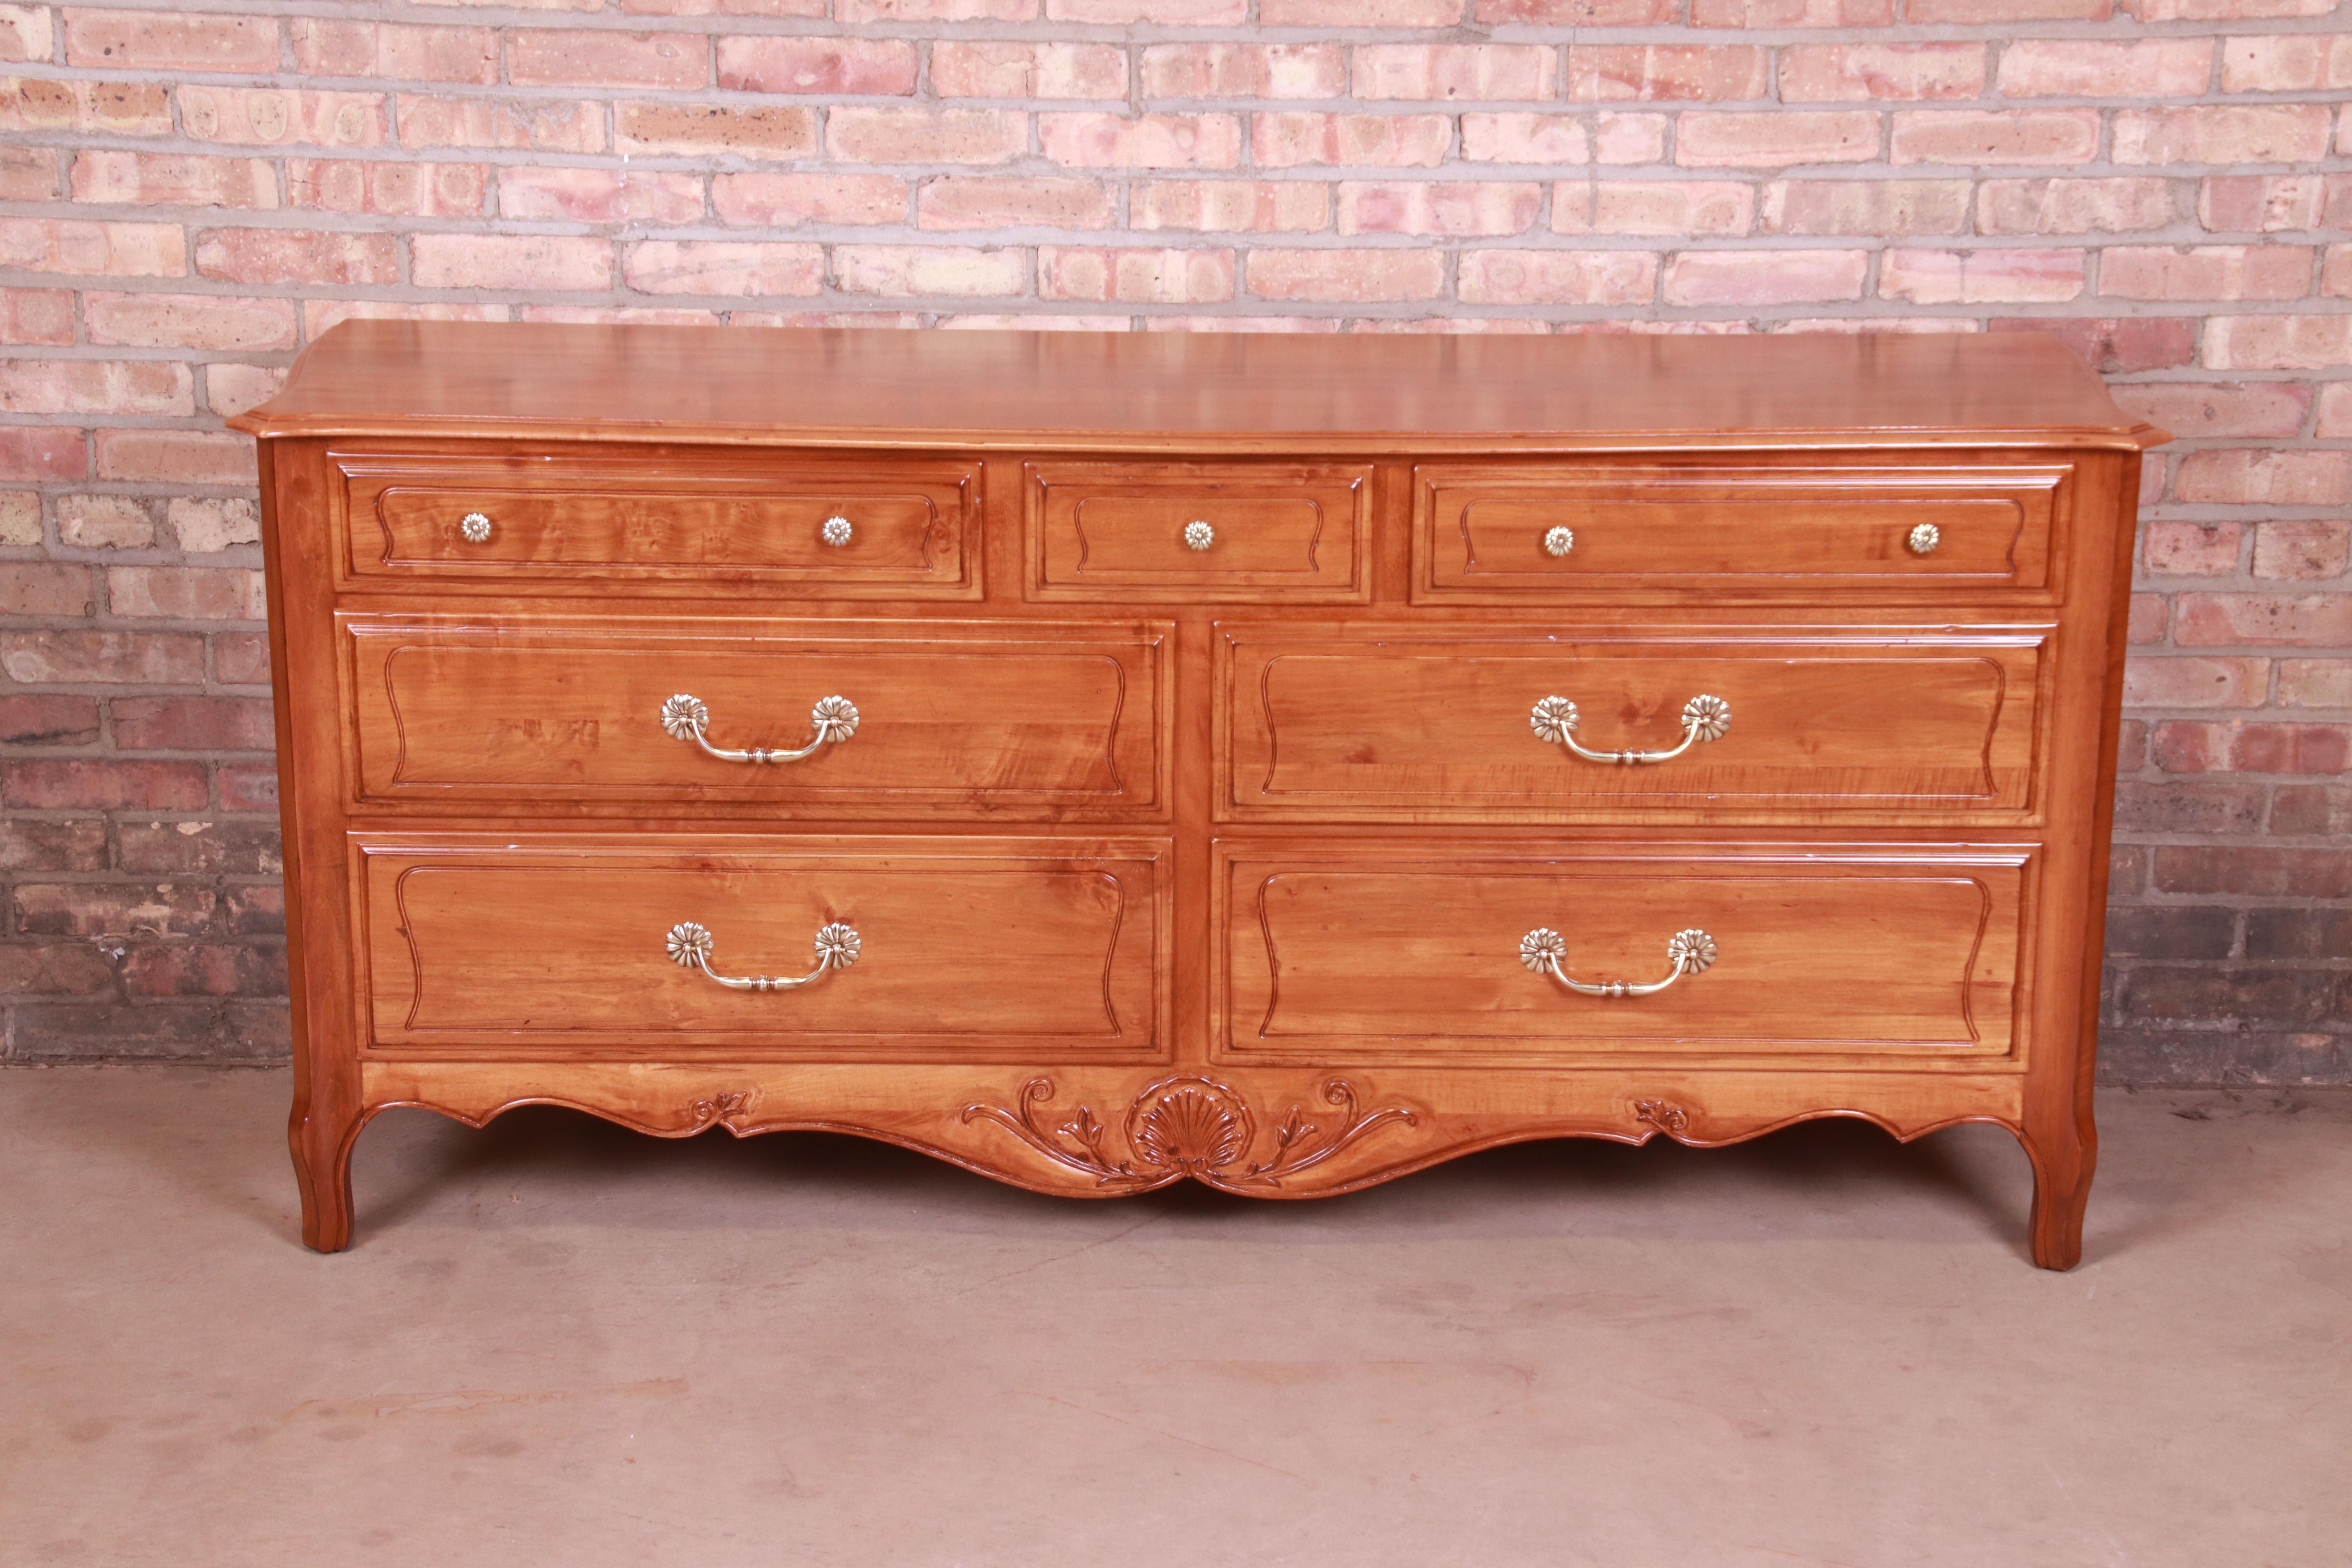 An exceptional French Provincial style seven-drawer dresser or credenza

USA, Circa 1990s

Carved solid cherry wood, with original brass hardware.

Measures: 68.5